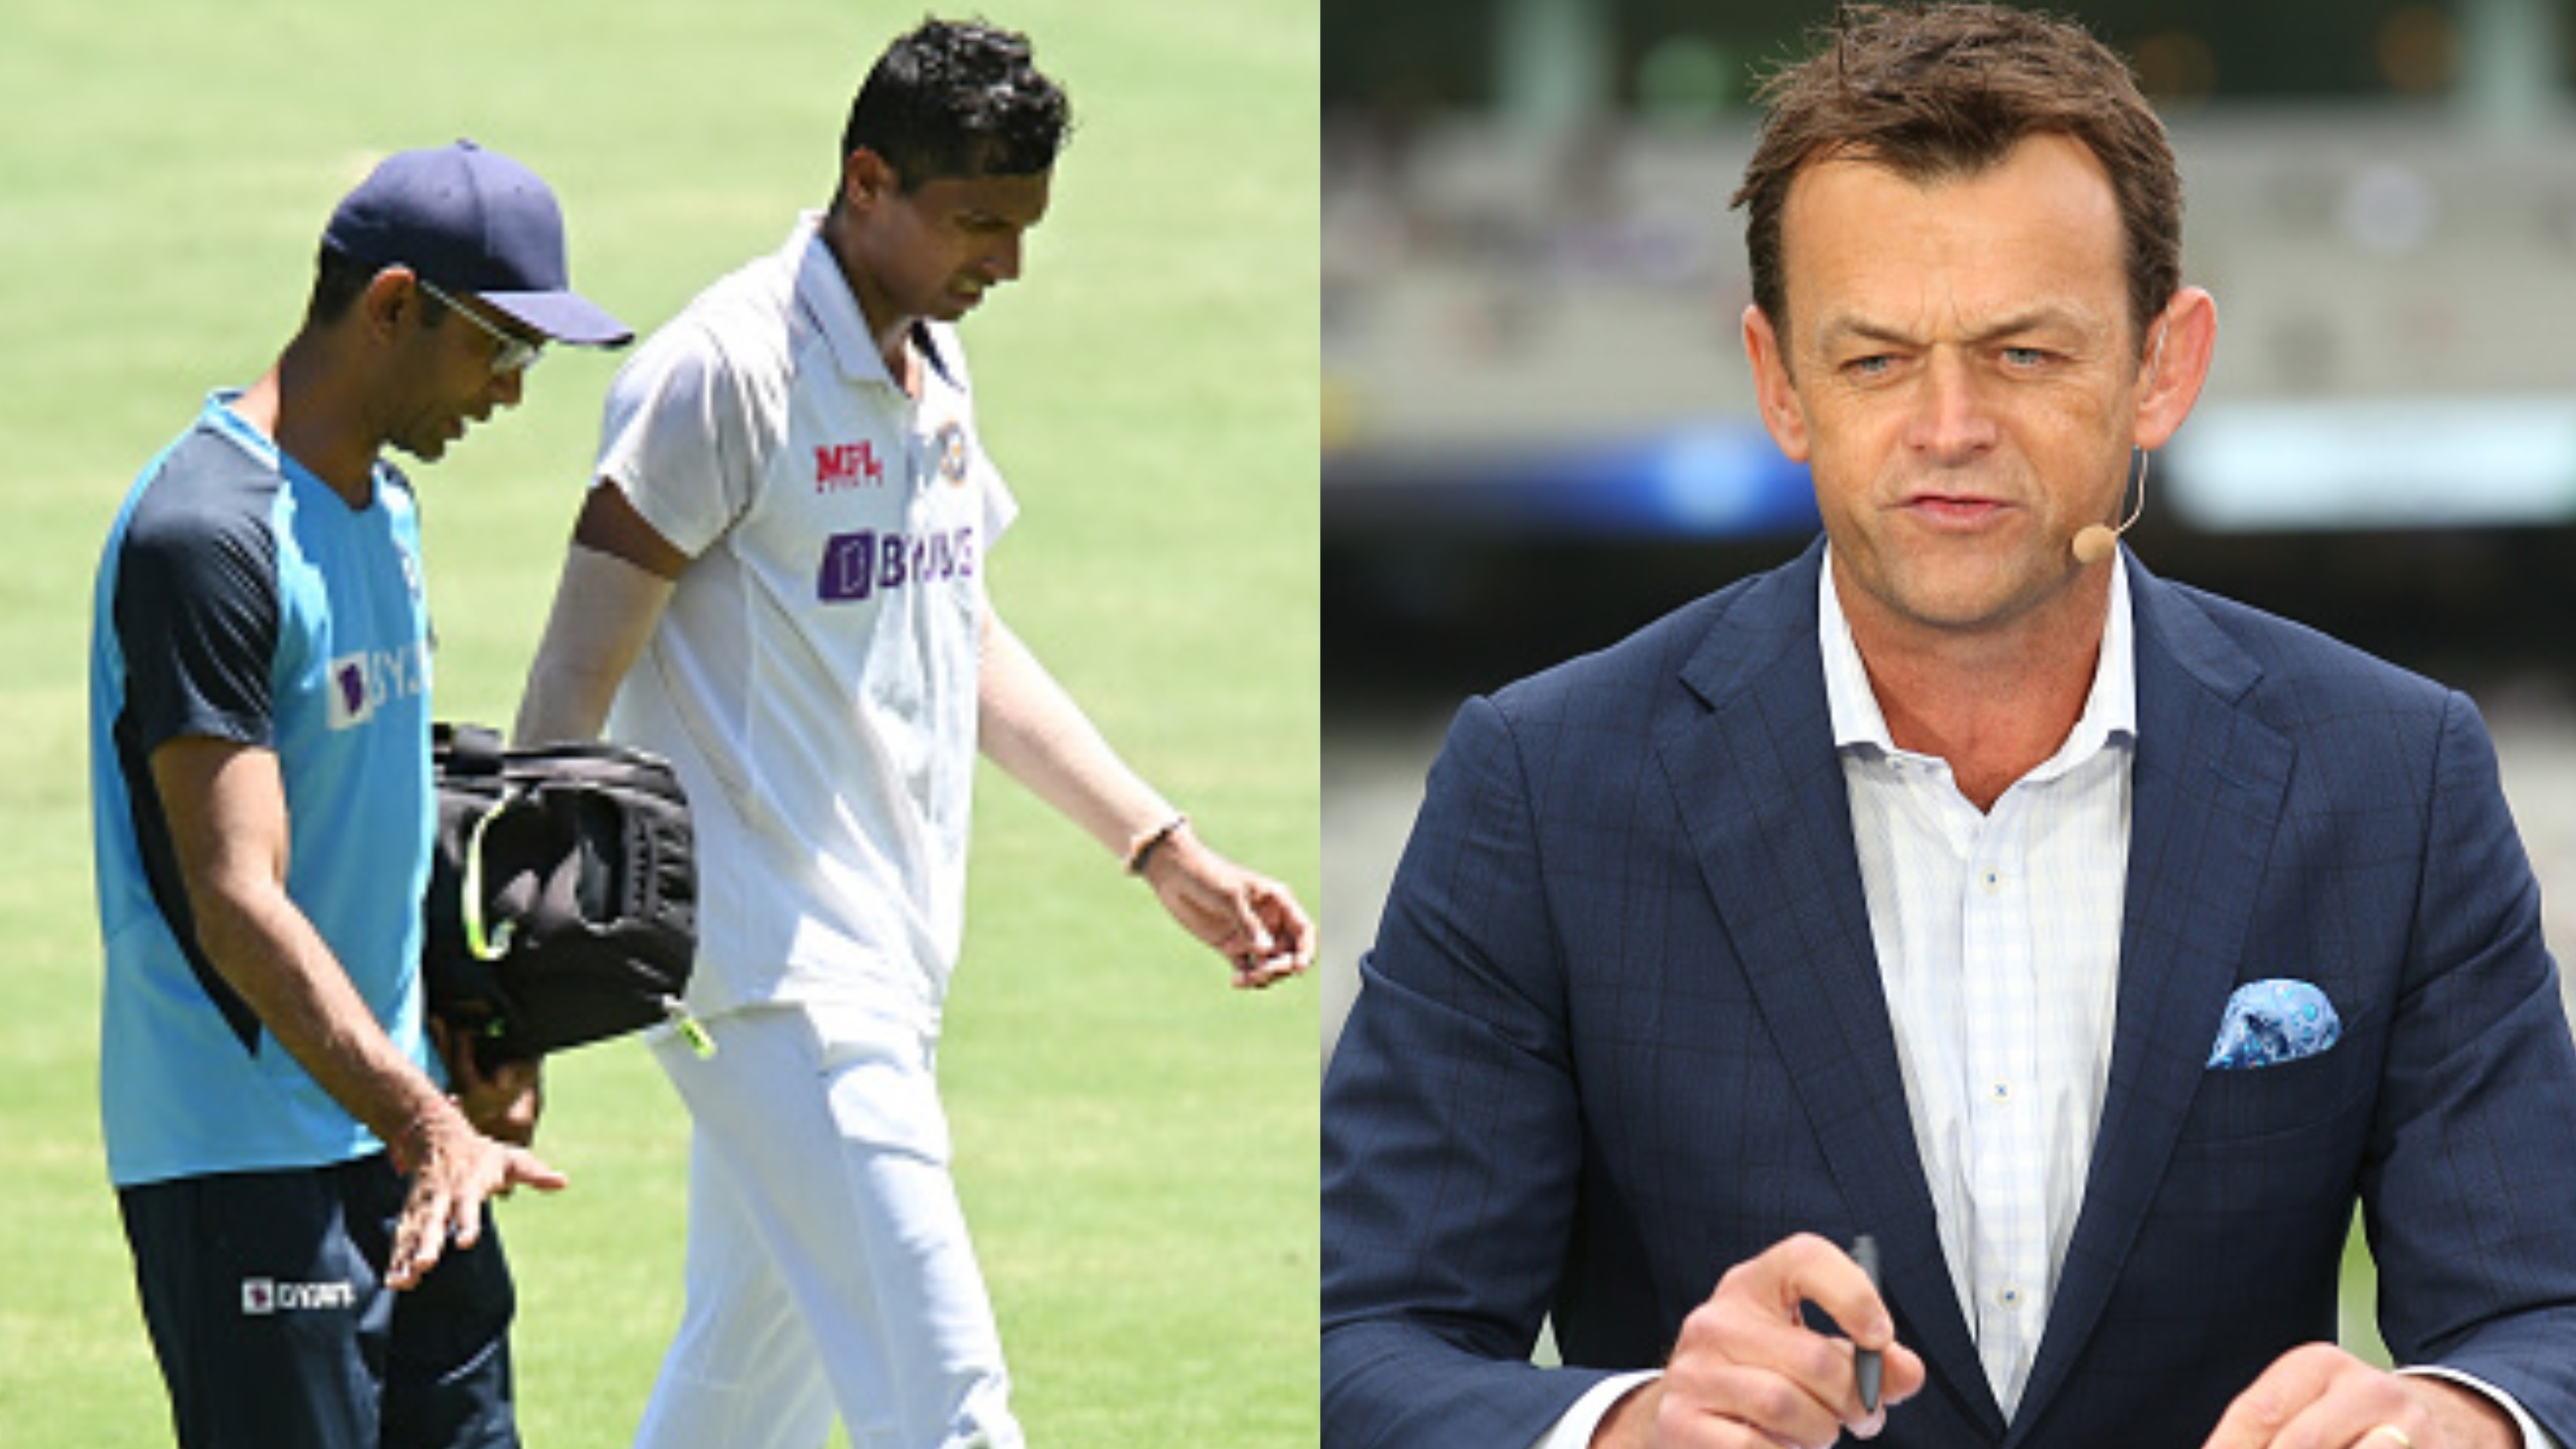 AUS v IND 2020-21: India need to work out why they've suffered so many injuries, says Adam Gilchrist